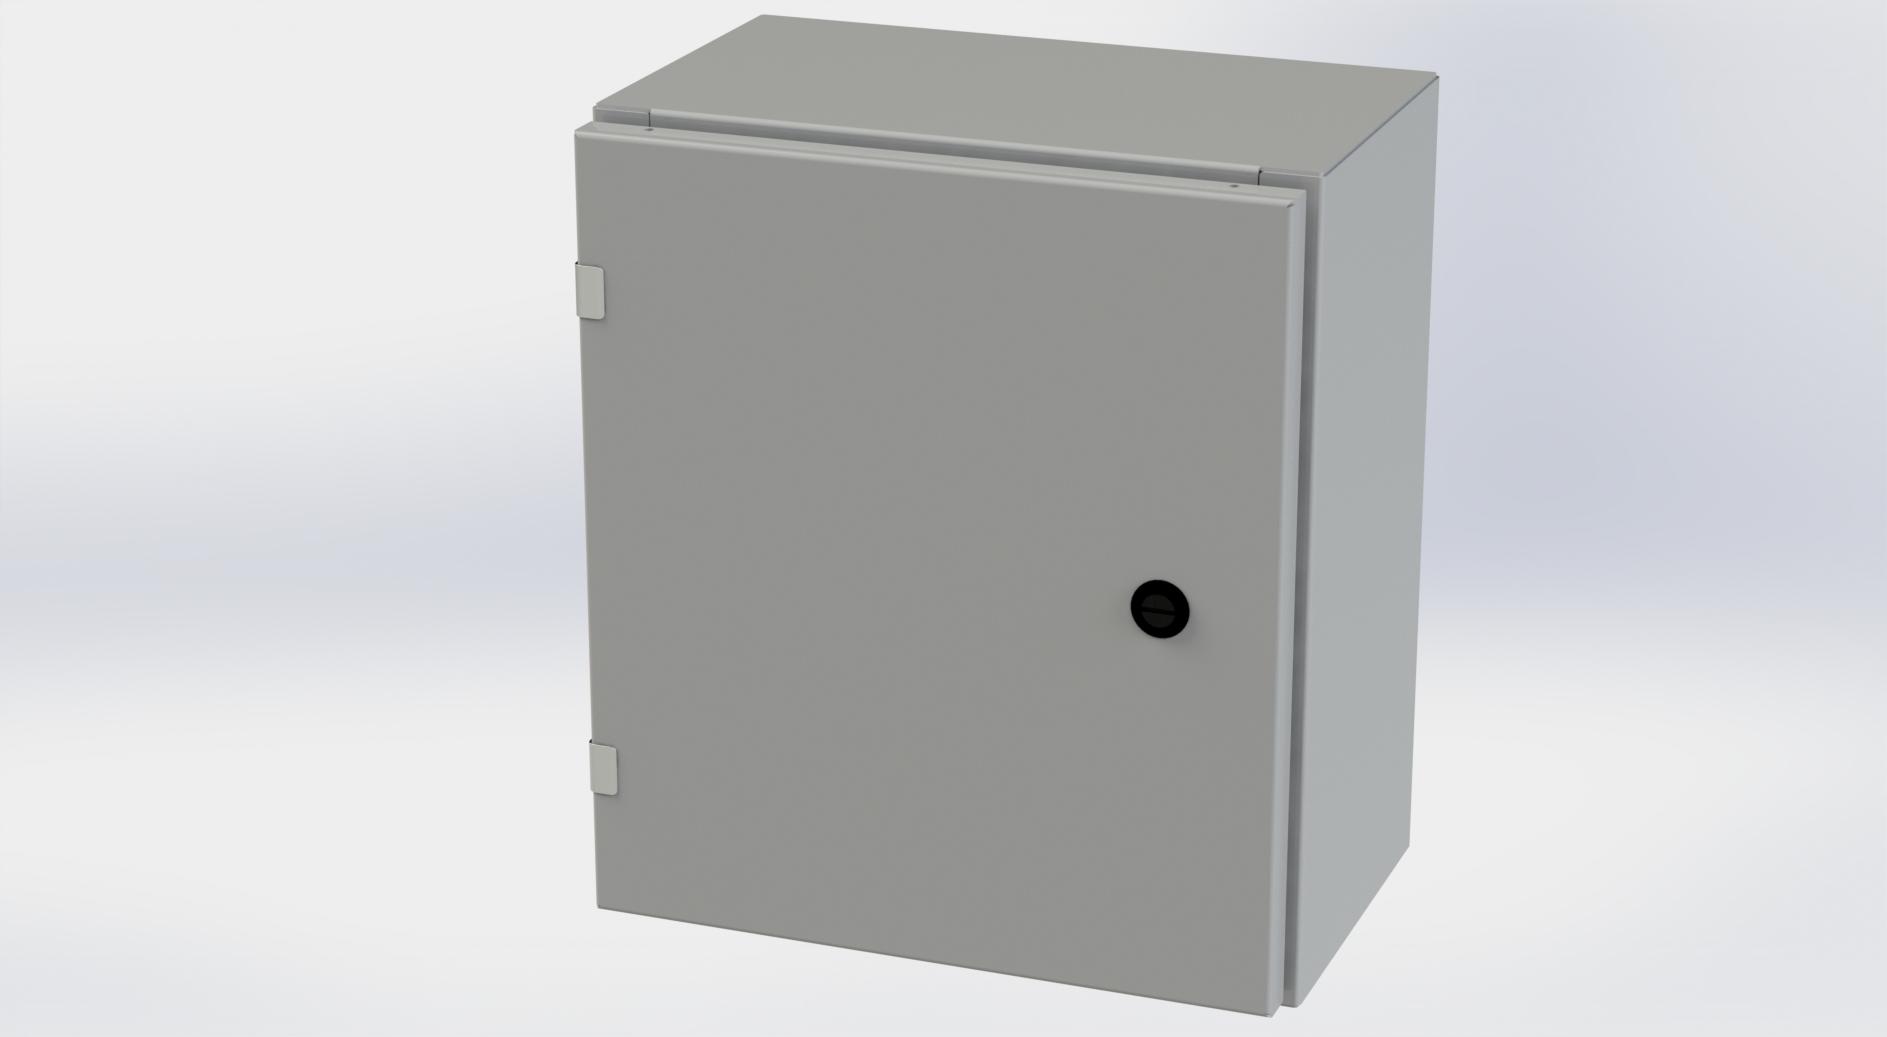 Saginaw Control SCE-16EL1408LP EL Enclosure, Height:16.00", Width:14.00", Depth:8.00", ANSI-61 gray powder coating inside and out. Optional sub-panels are powder coated white.